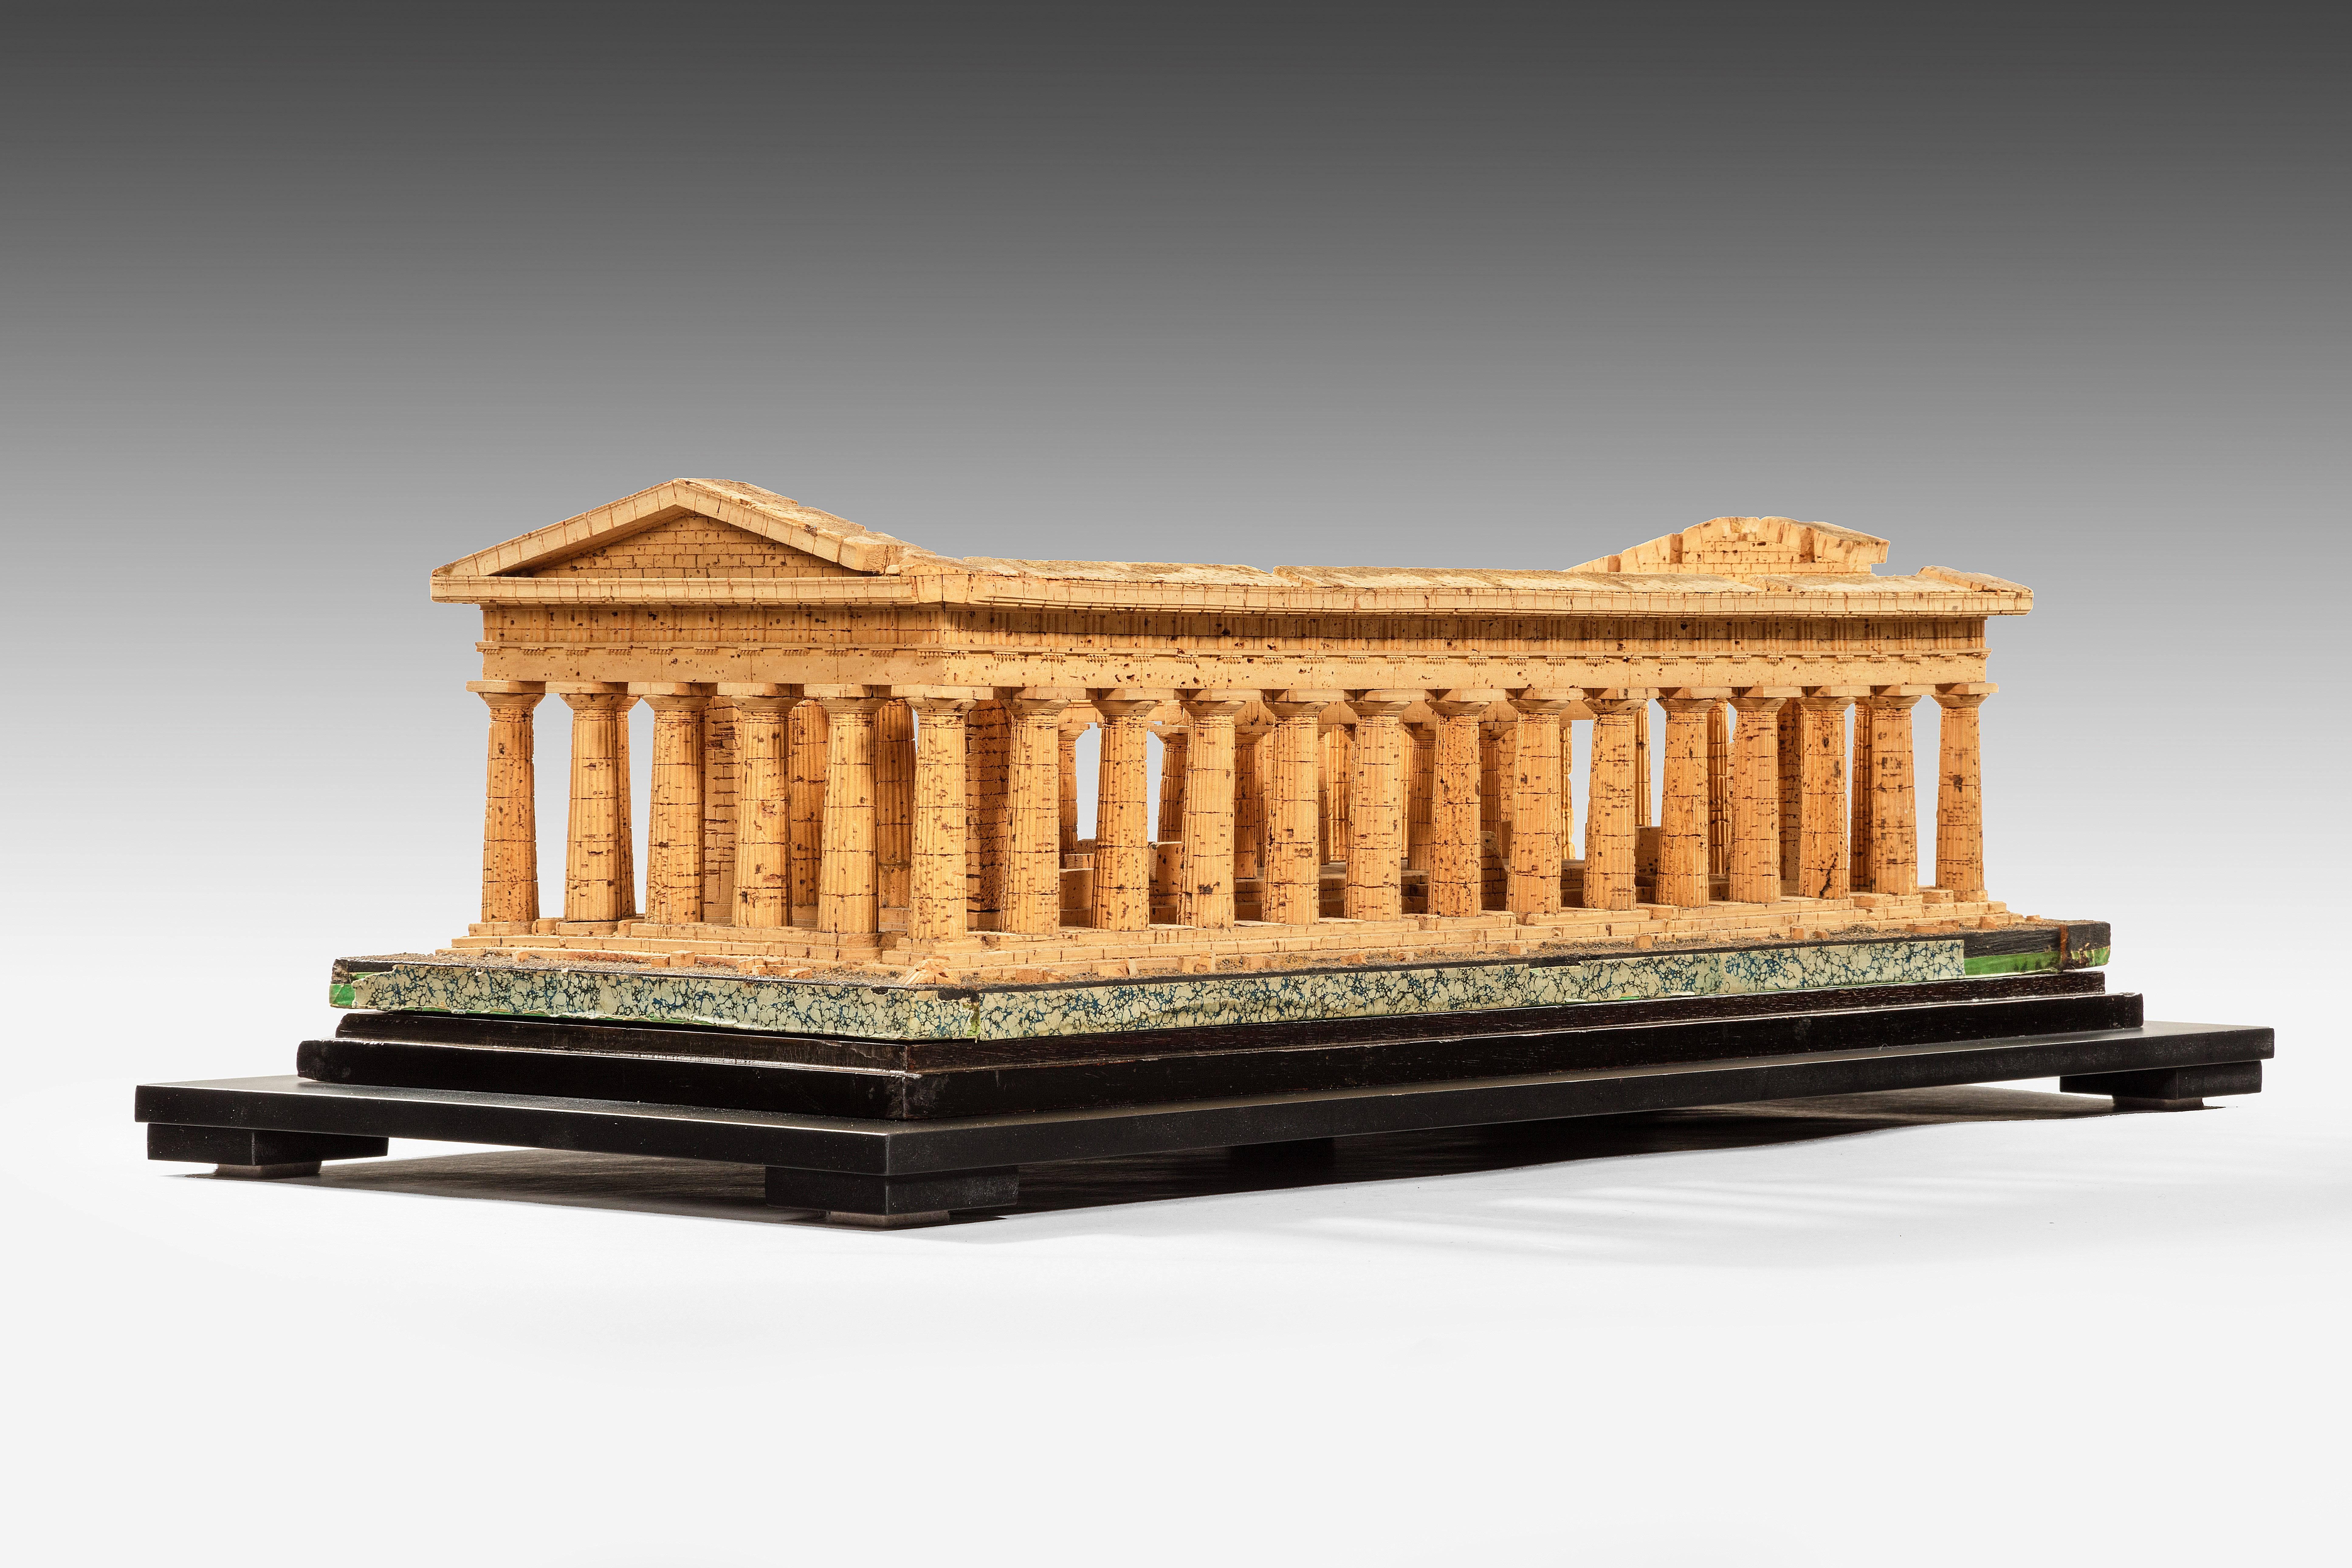 Provenance: Owned by Mr. Fattio, tailor to the Naples Royal Family, and thence by descent.

Attributed to Domenico Padiglione’s workshop. Made in Naples, Italy.

An intricate cork model of the Temple of Zeus (formerly thought to be the Temple of